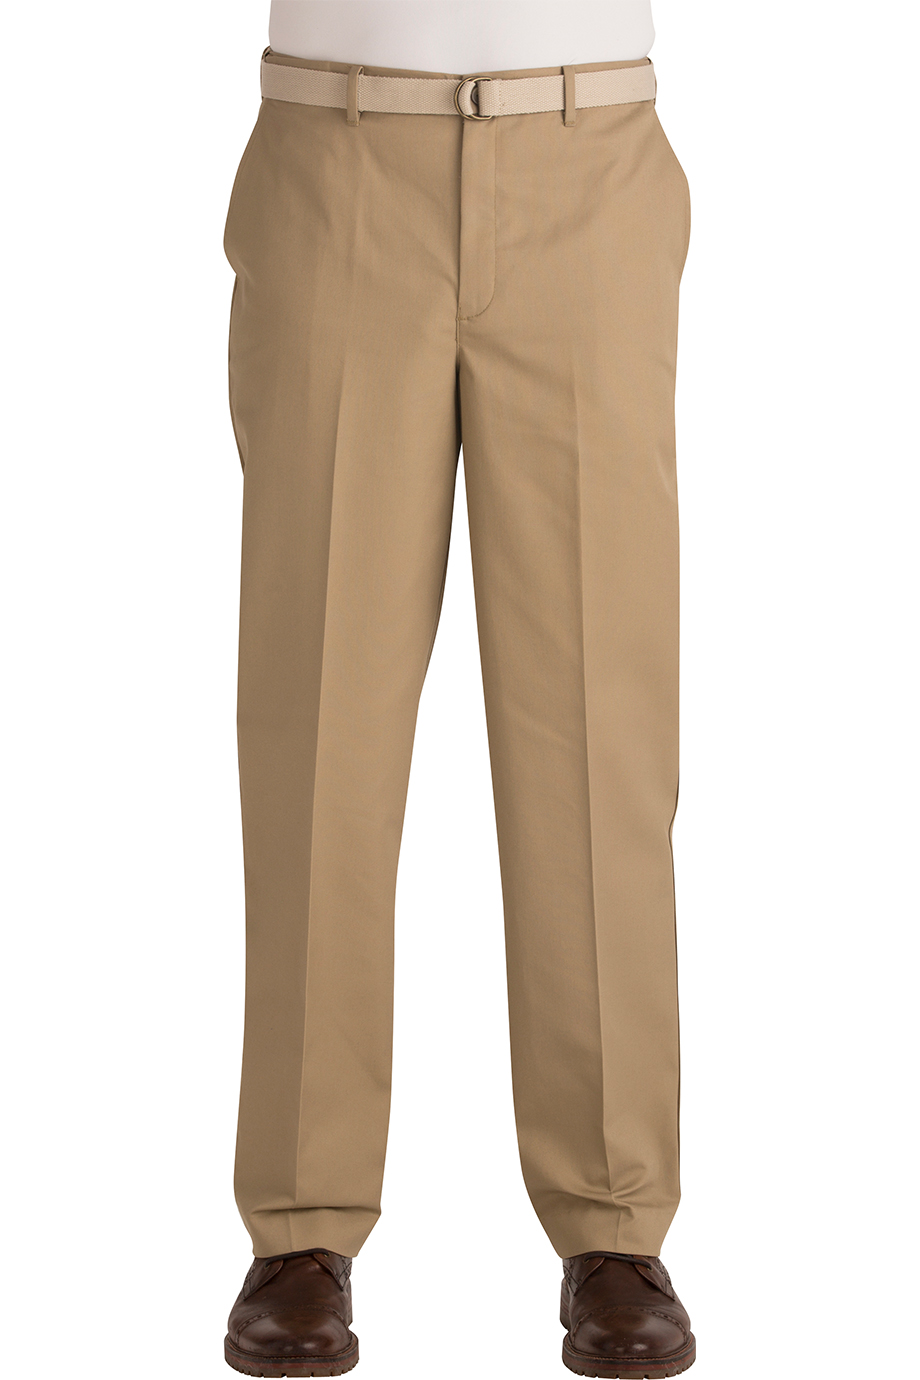 Edwards Garment 2578 - Men's Easy Fit Chino Flat Front Pant